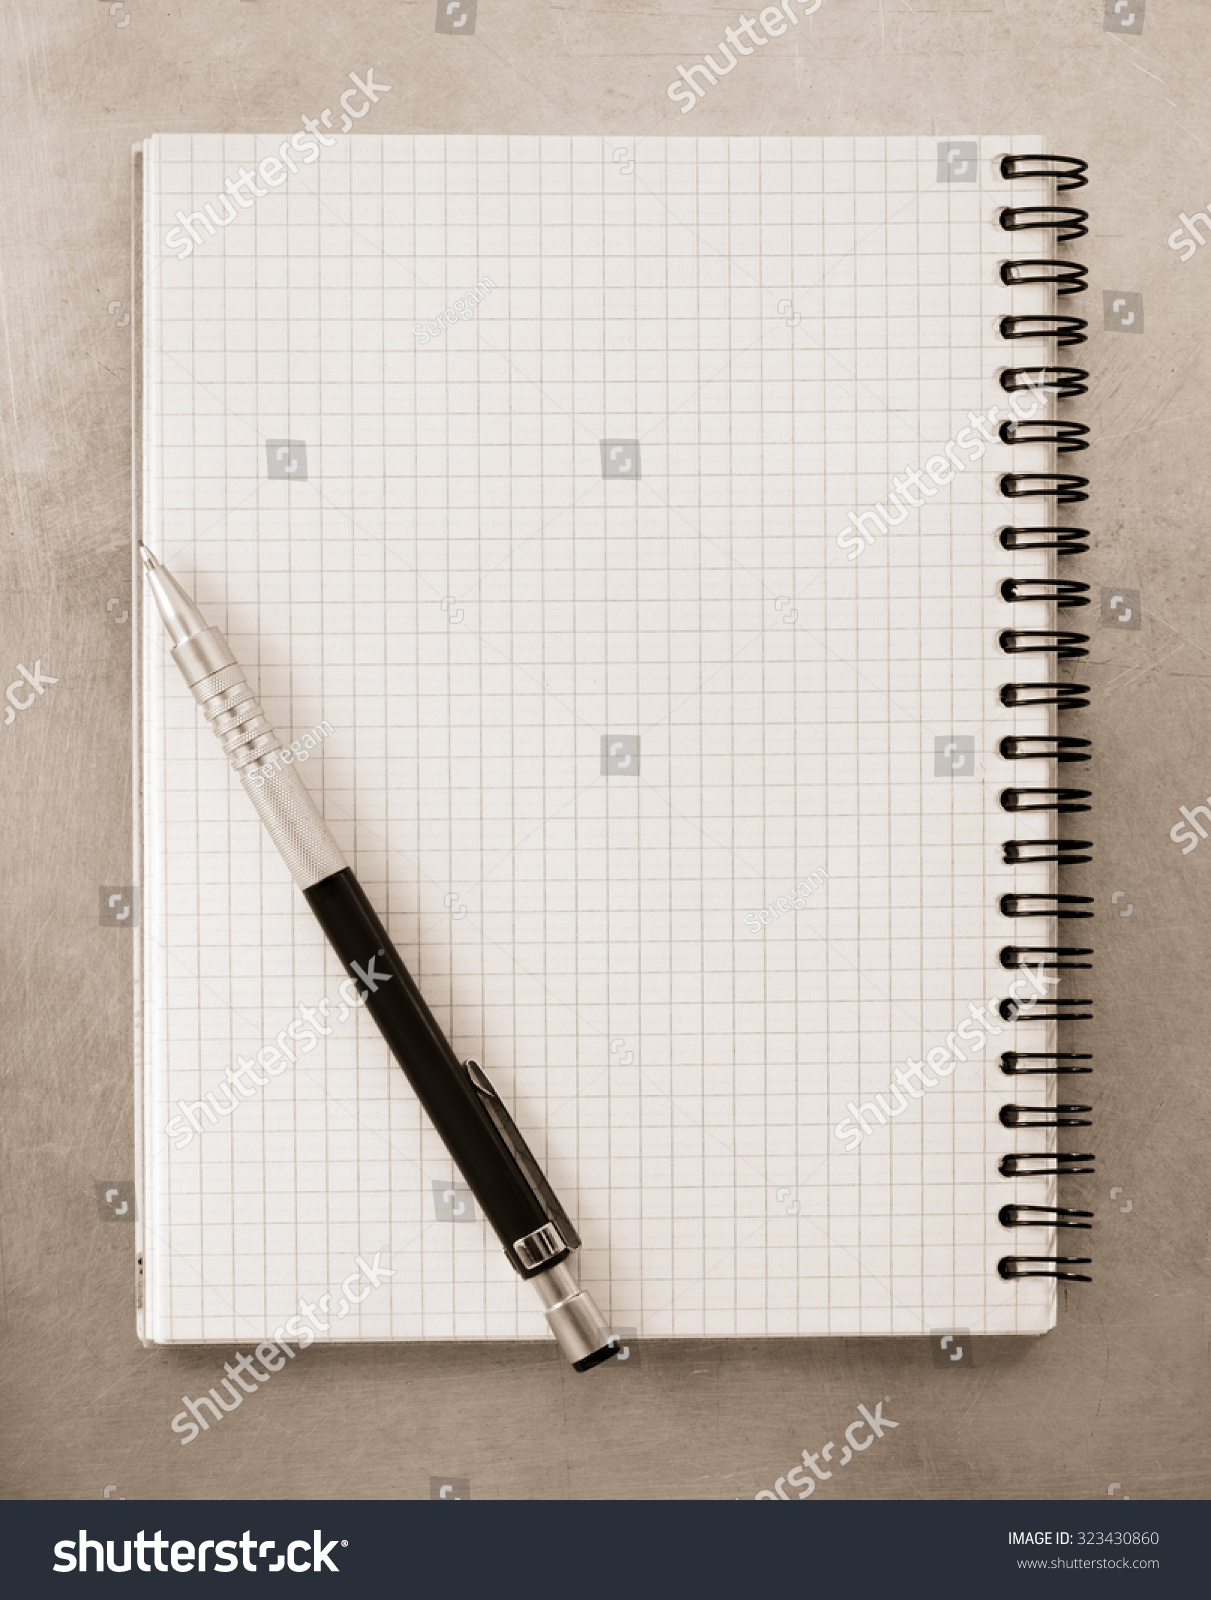 Checked Notebook Metal Background Texture Stock Photo 323430860 ...